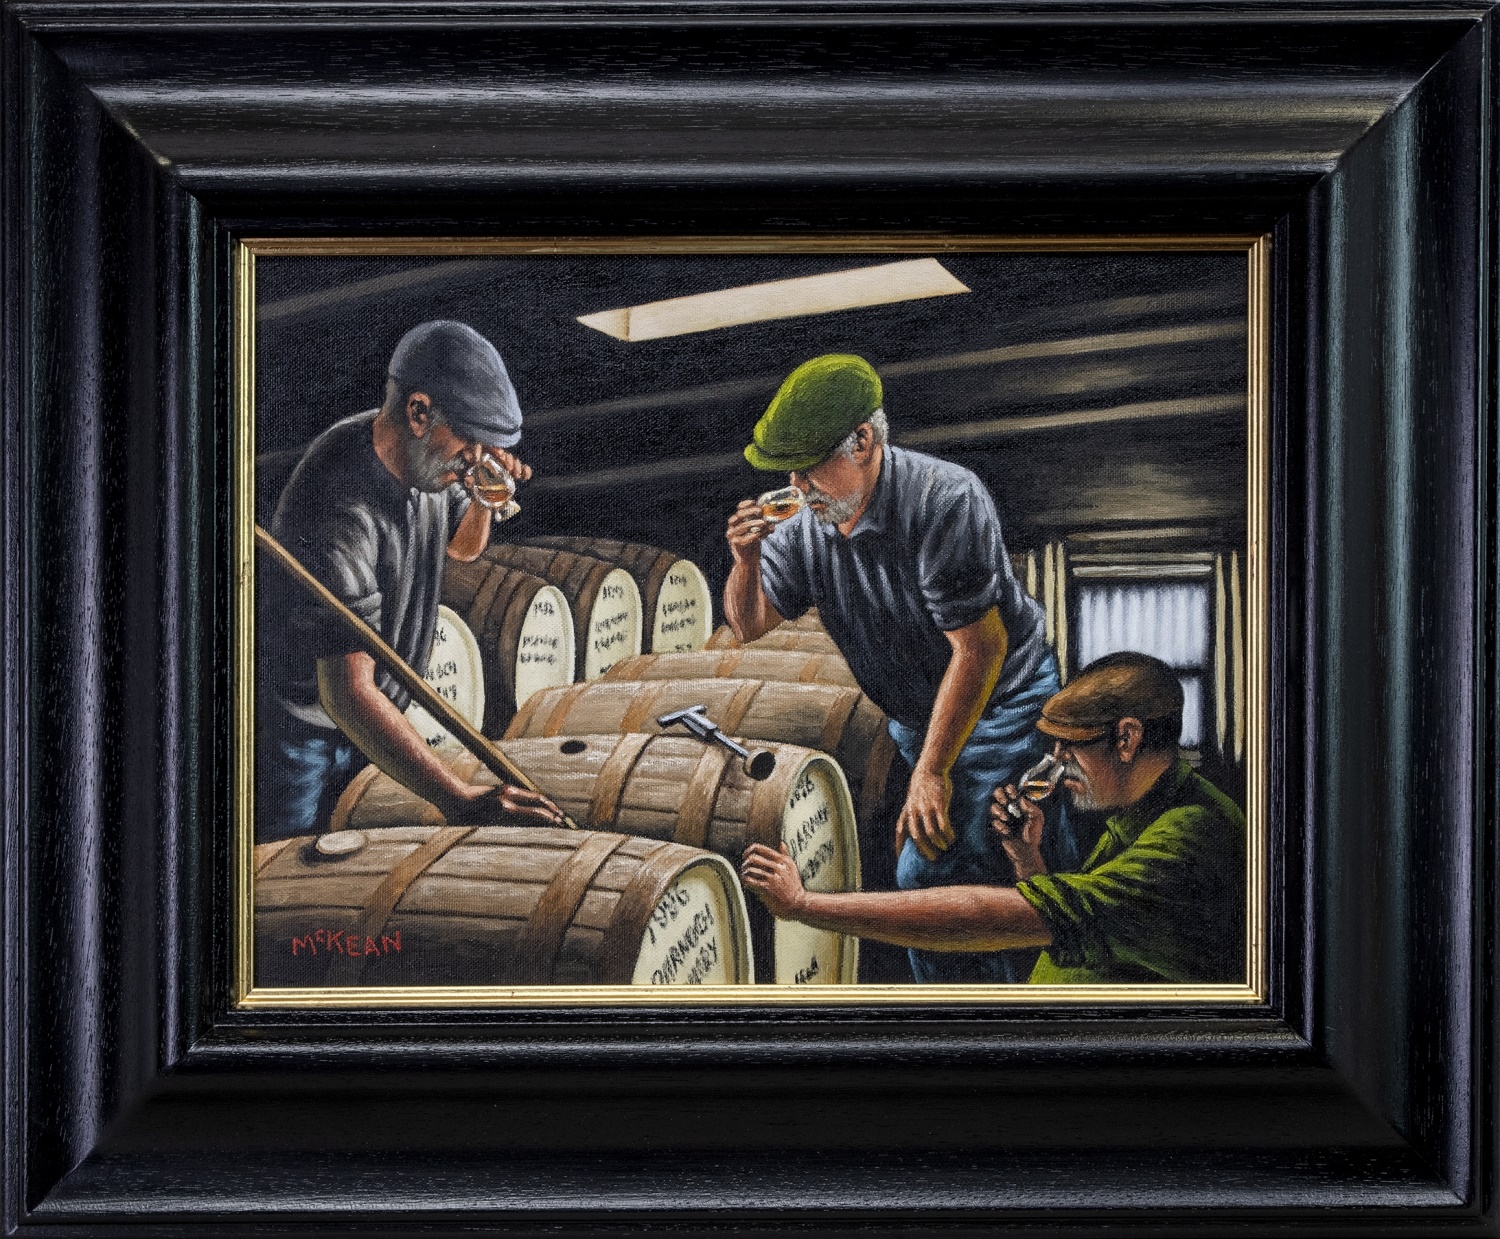 THE WHISKY NOSERS AND TASTERS, AN OIL BY GRAHAM MCKEAN